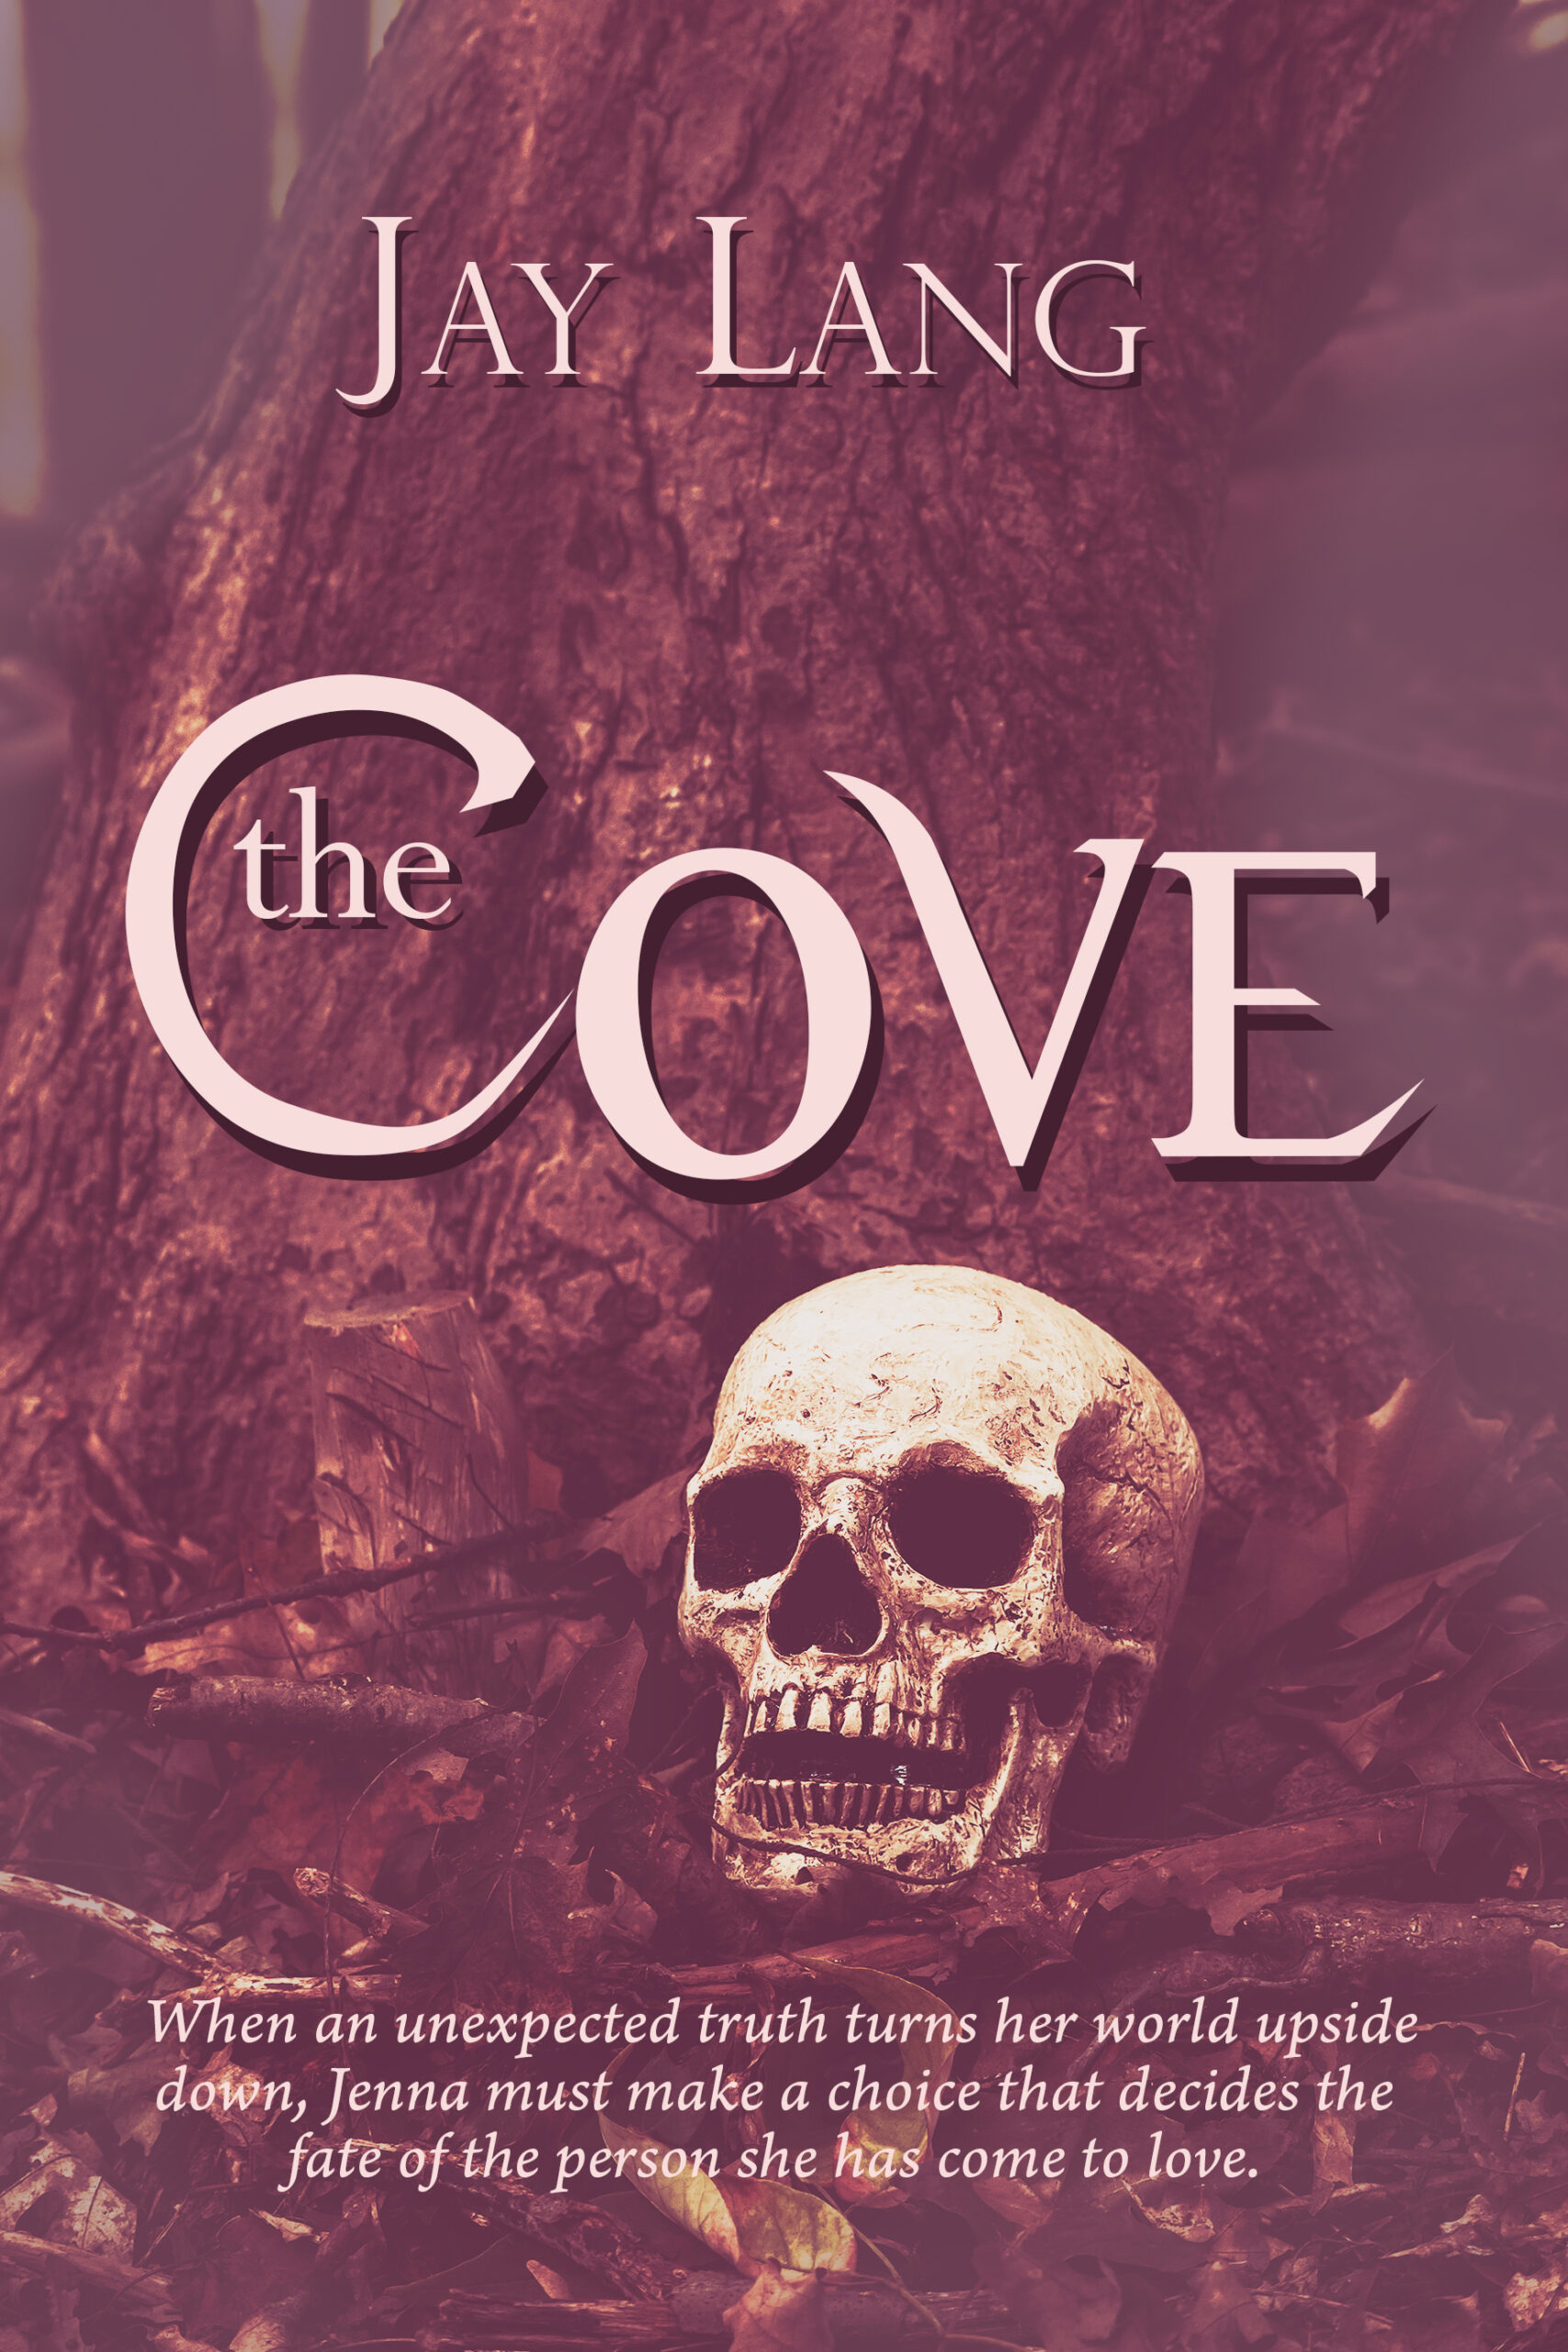 Jay Lang “The Cove” book cover, image by Michelle Lee